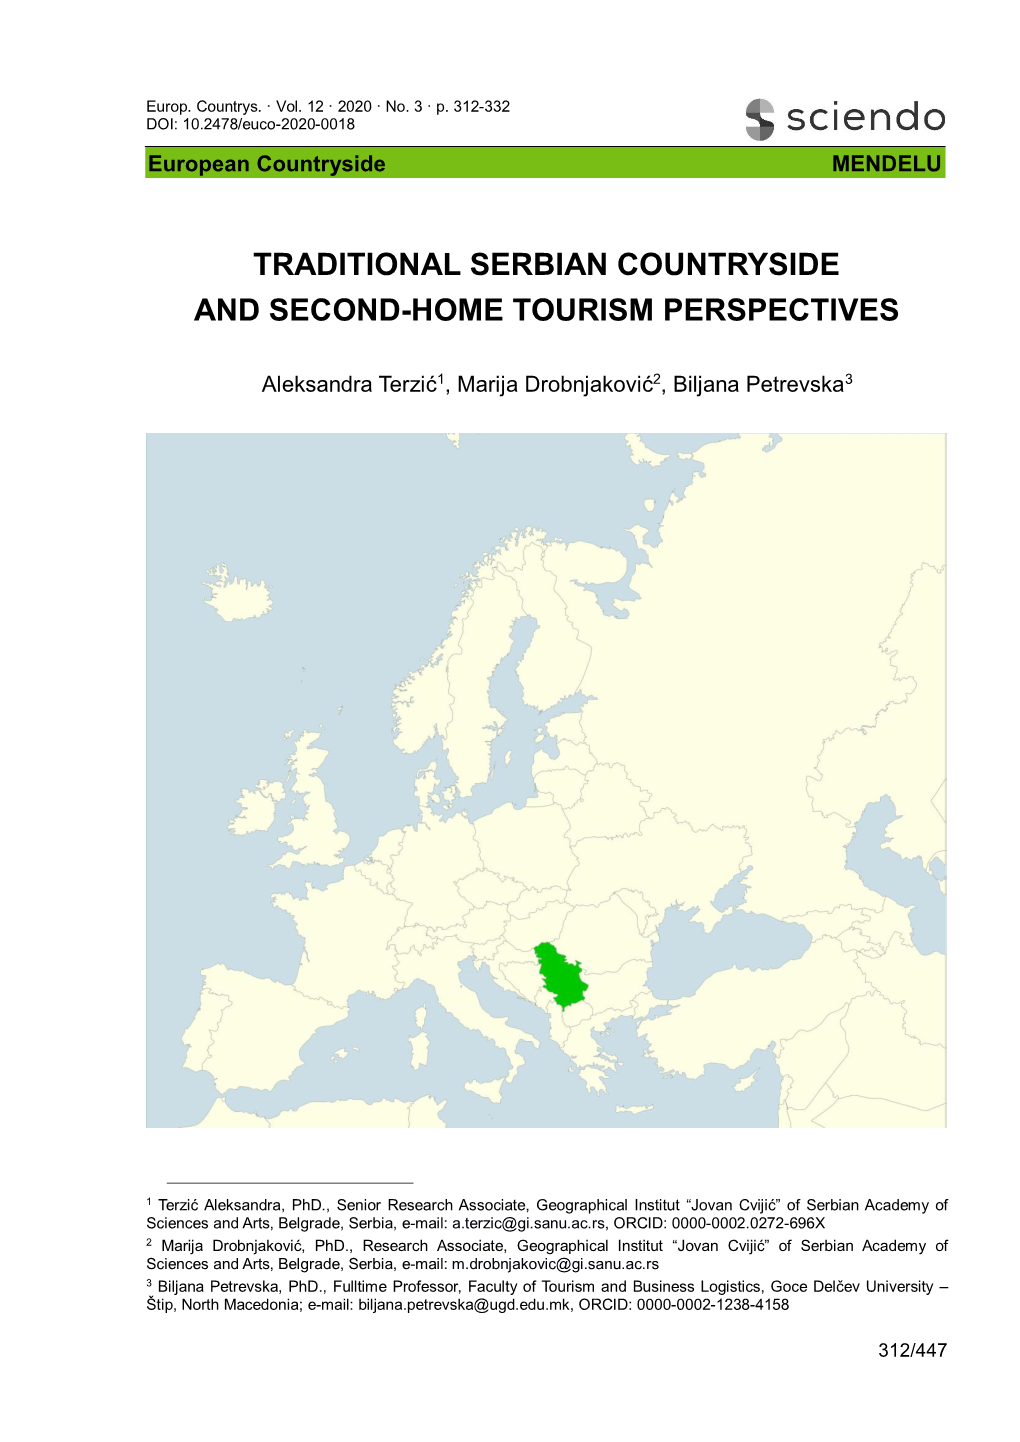 Traditional Serbian Countryside and Second-Home Tourism Perspectives